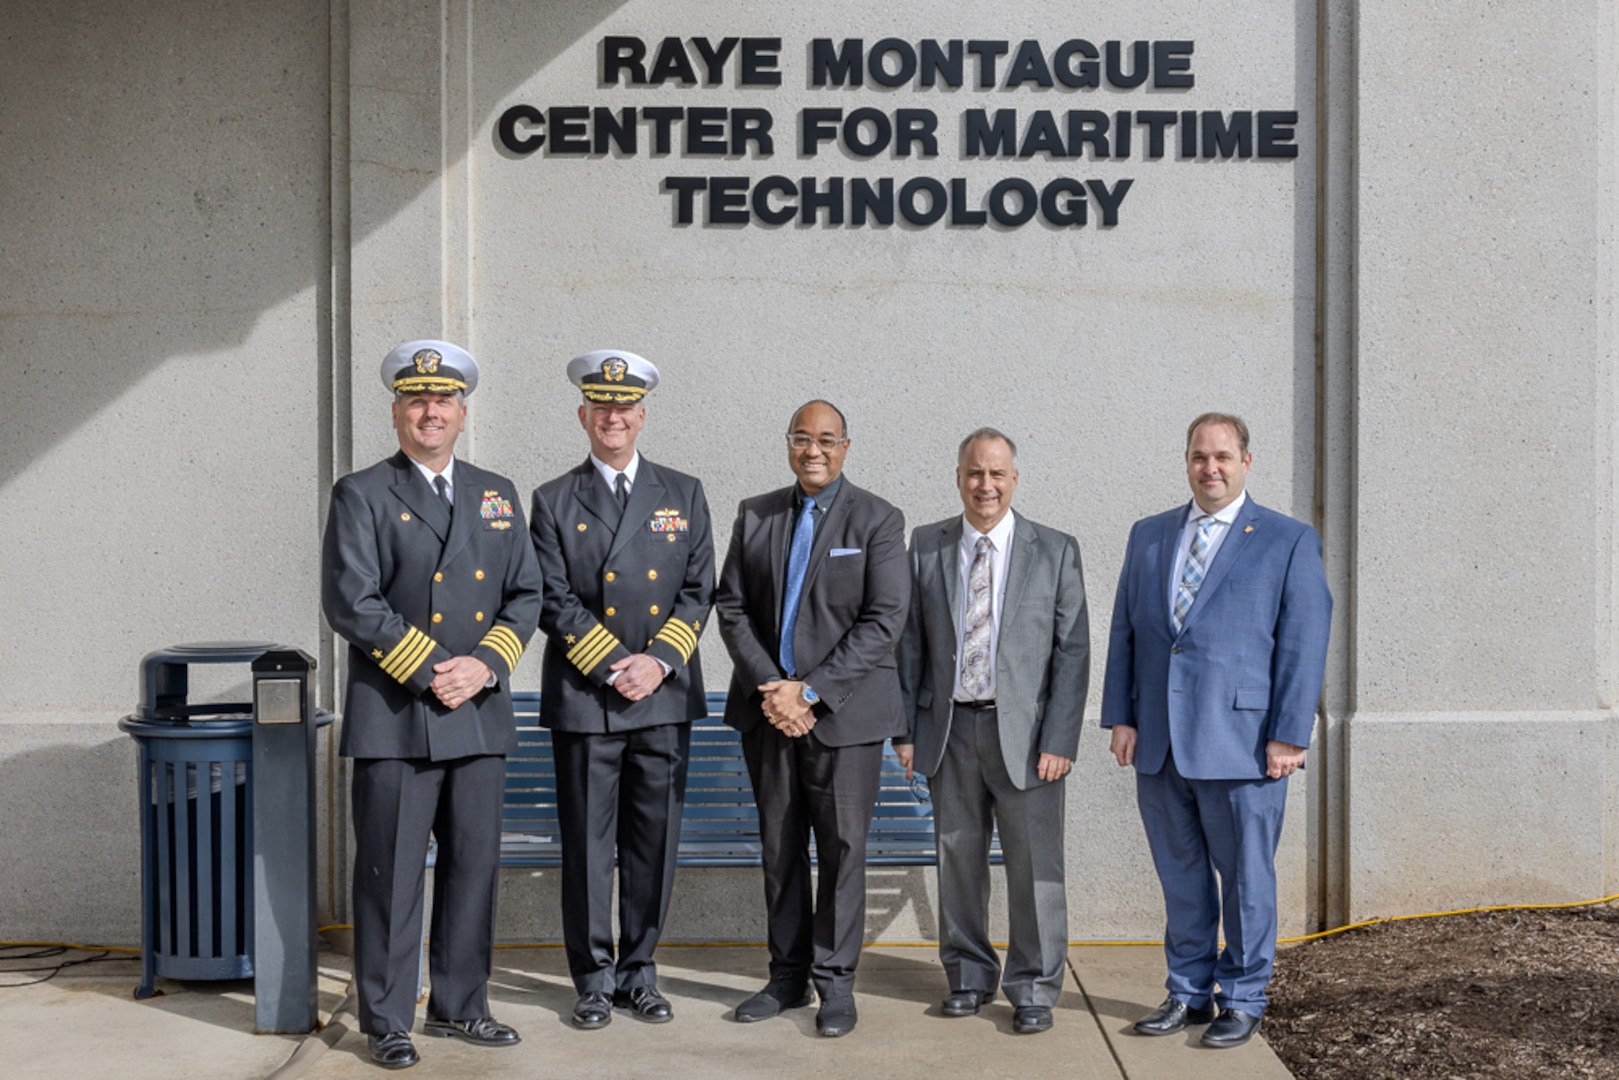 Naval Surface Warfare Center, Carderock Division Commanding Officer Capt. Matthew Tardy (left) and Technical Director Lawrence Tarasek, SES, (center right) take a photo with former Carderock Commanding Officer, Capt. Todd Hutchison (center left); Associate Vice Chancellor for Academic Affairs and Student Success at the University of Arkansas at Little Rock, Dr. David Montague (center); and Naval Sea Systems Command Warfare Centers Director, Marty Irvine.